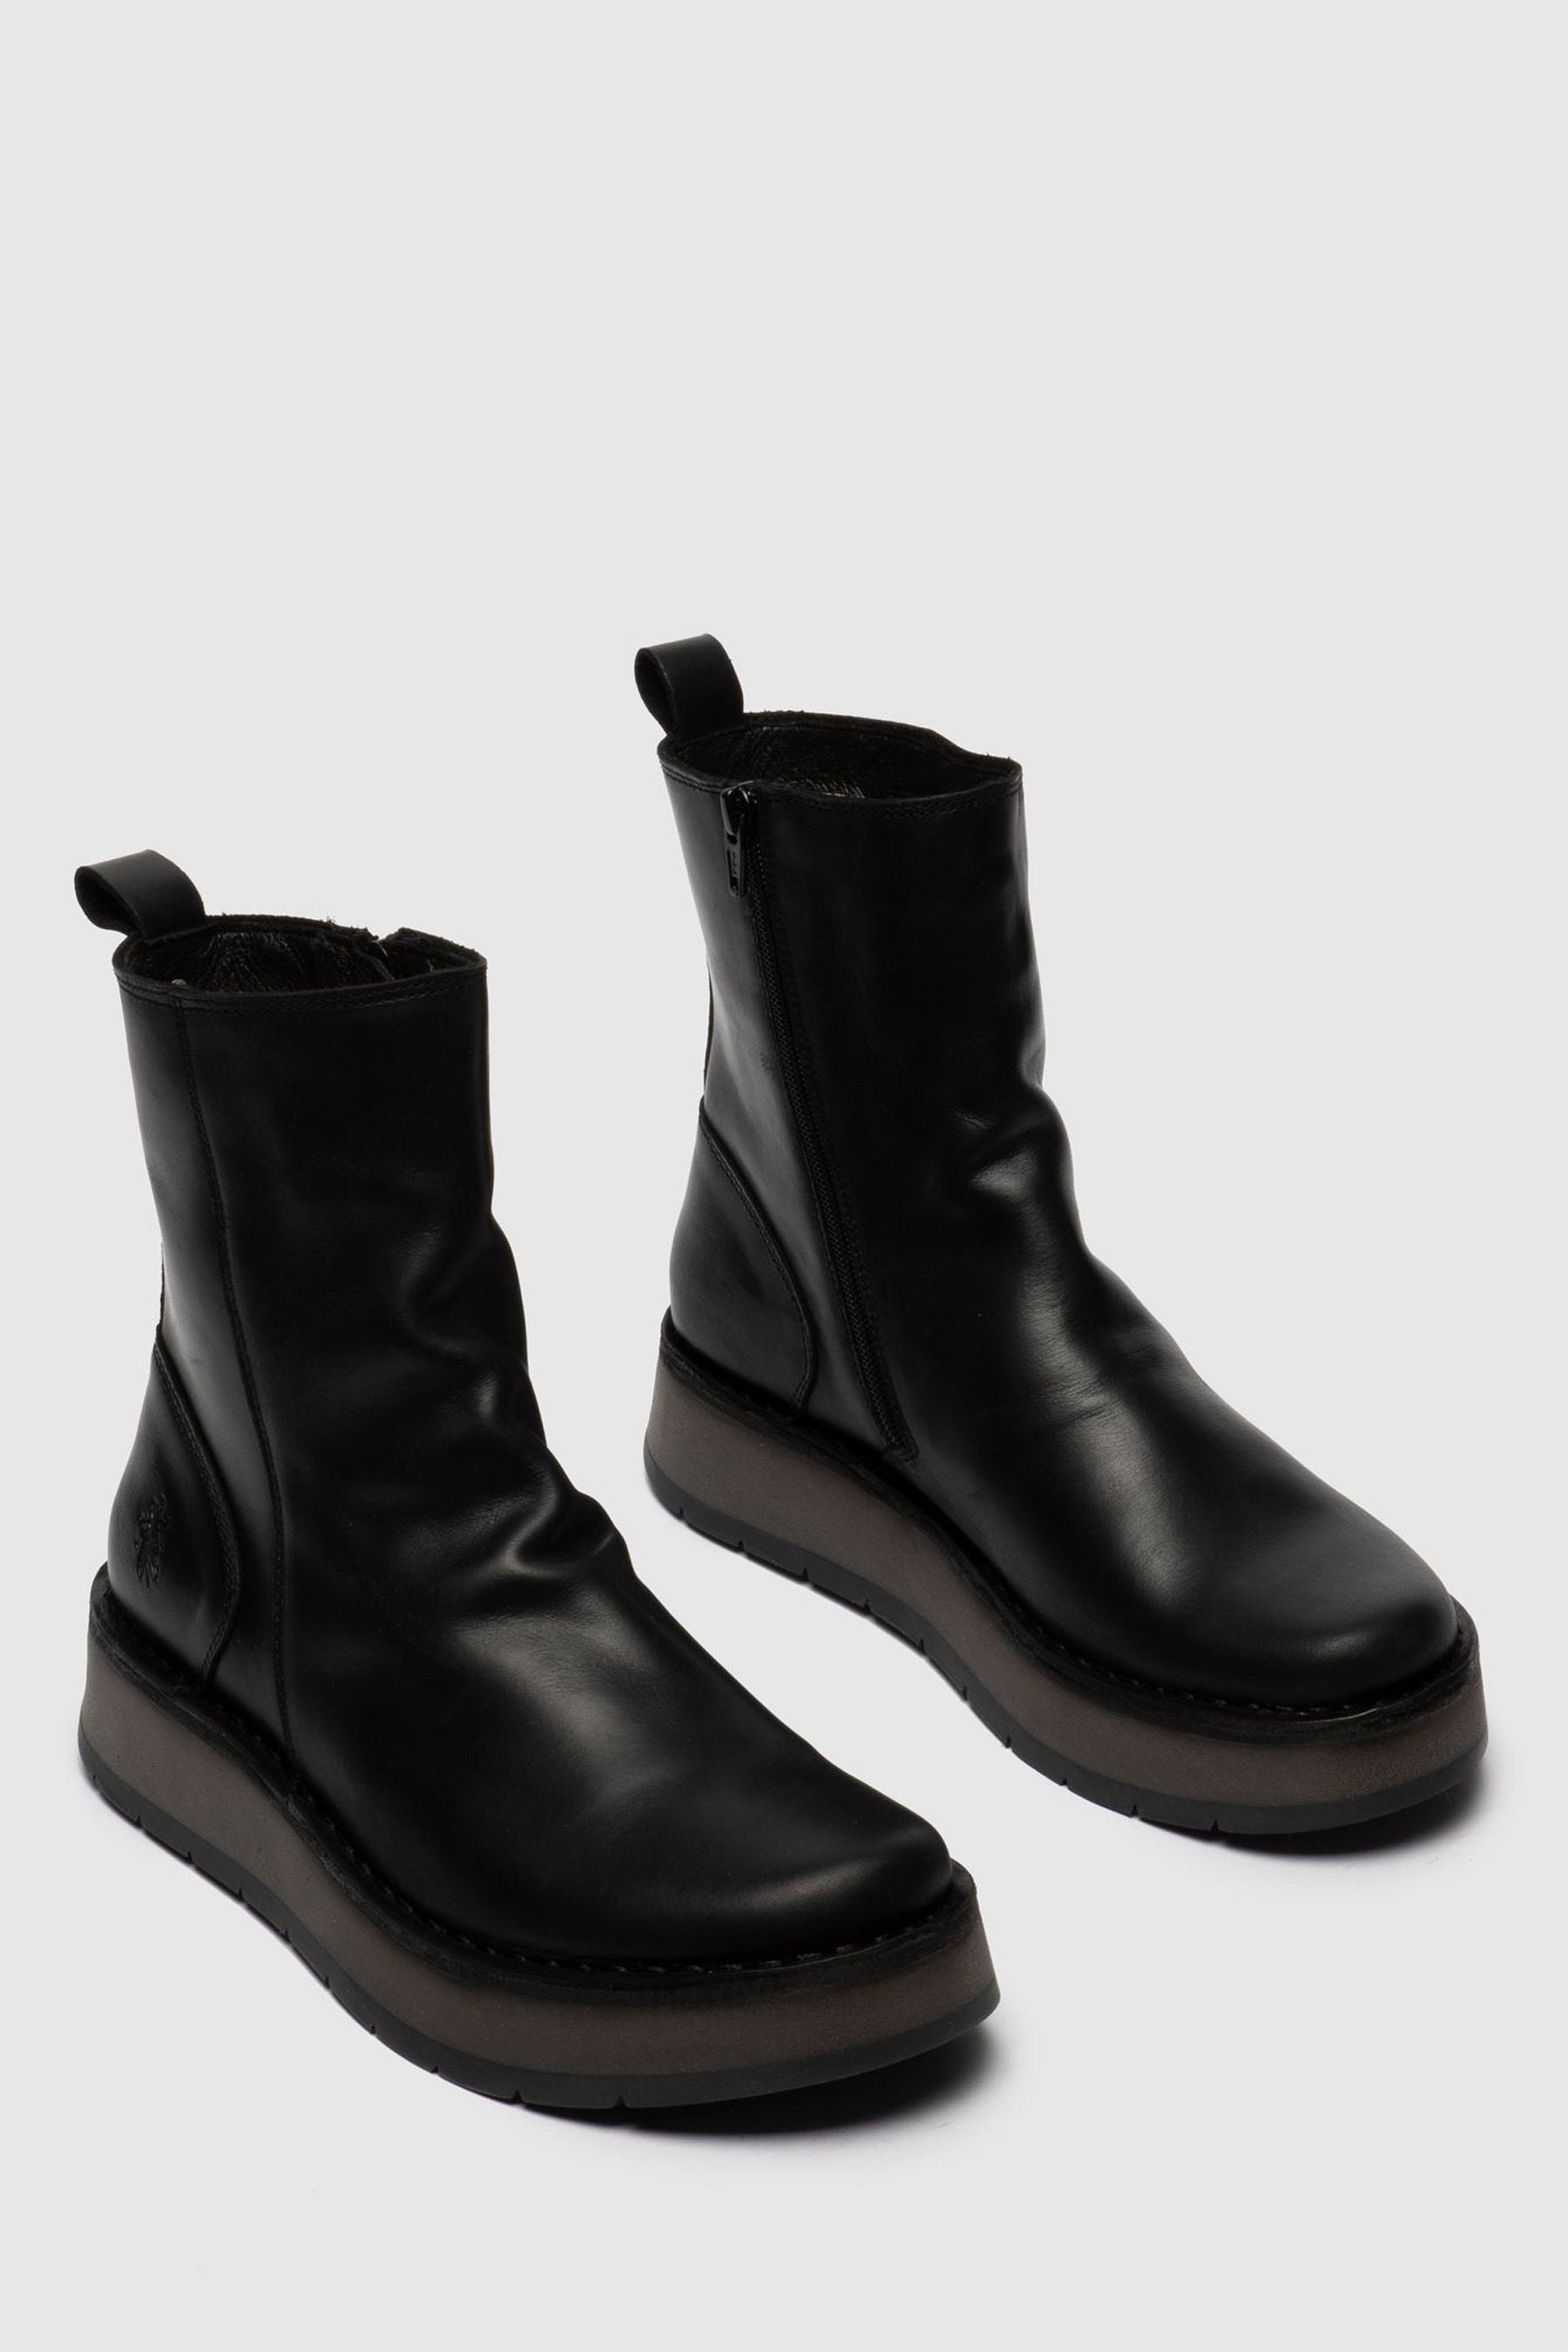 Buy Fly London Ren Ankle Boots from the Next UK online shop